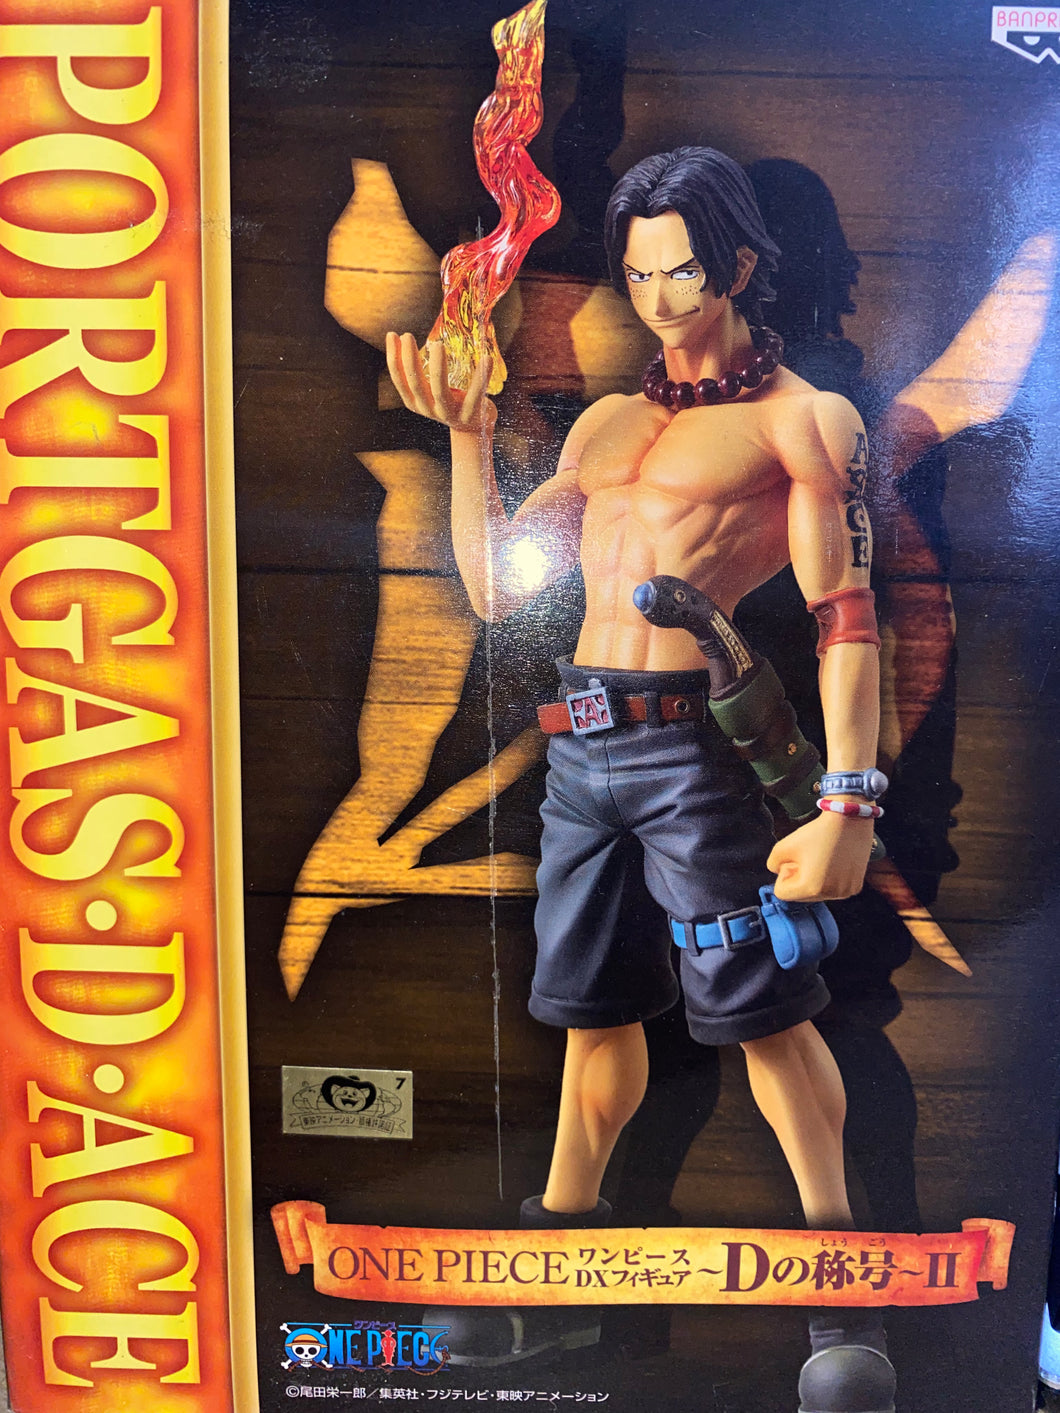 One Piece - Portgas D Ace (Lineage of D) - Open Box